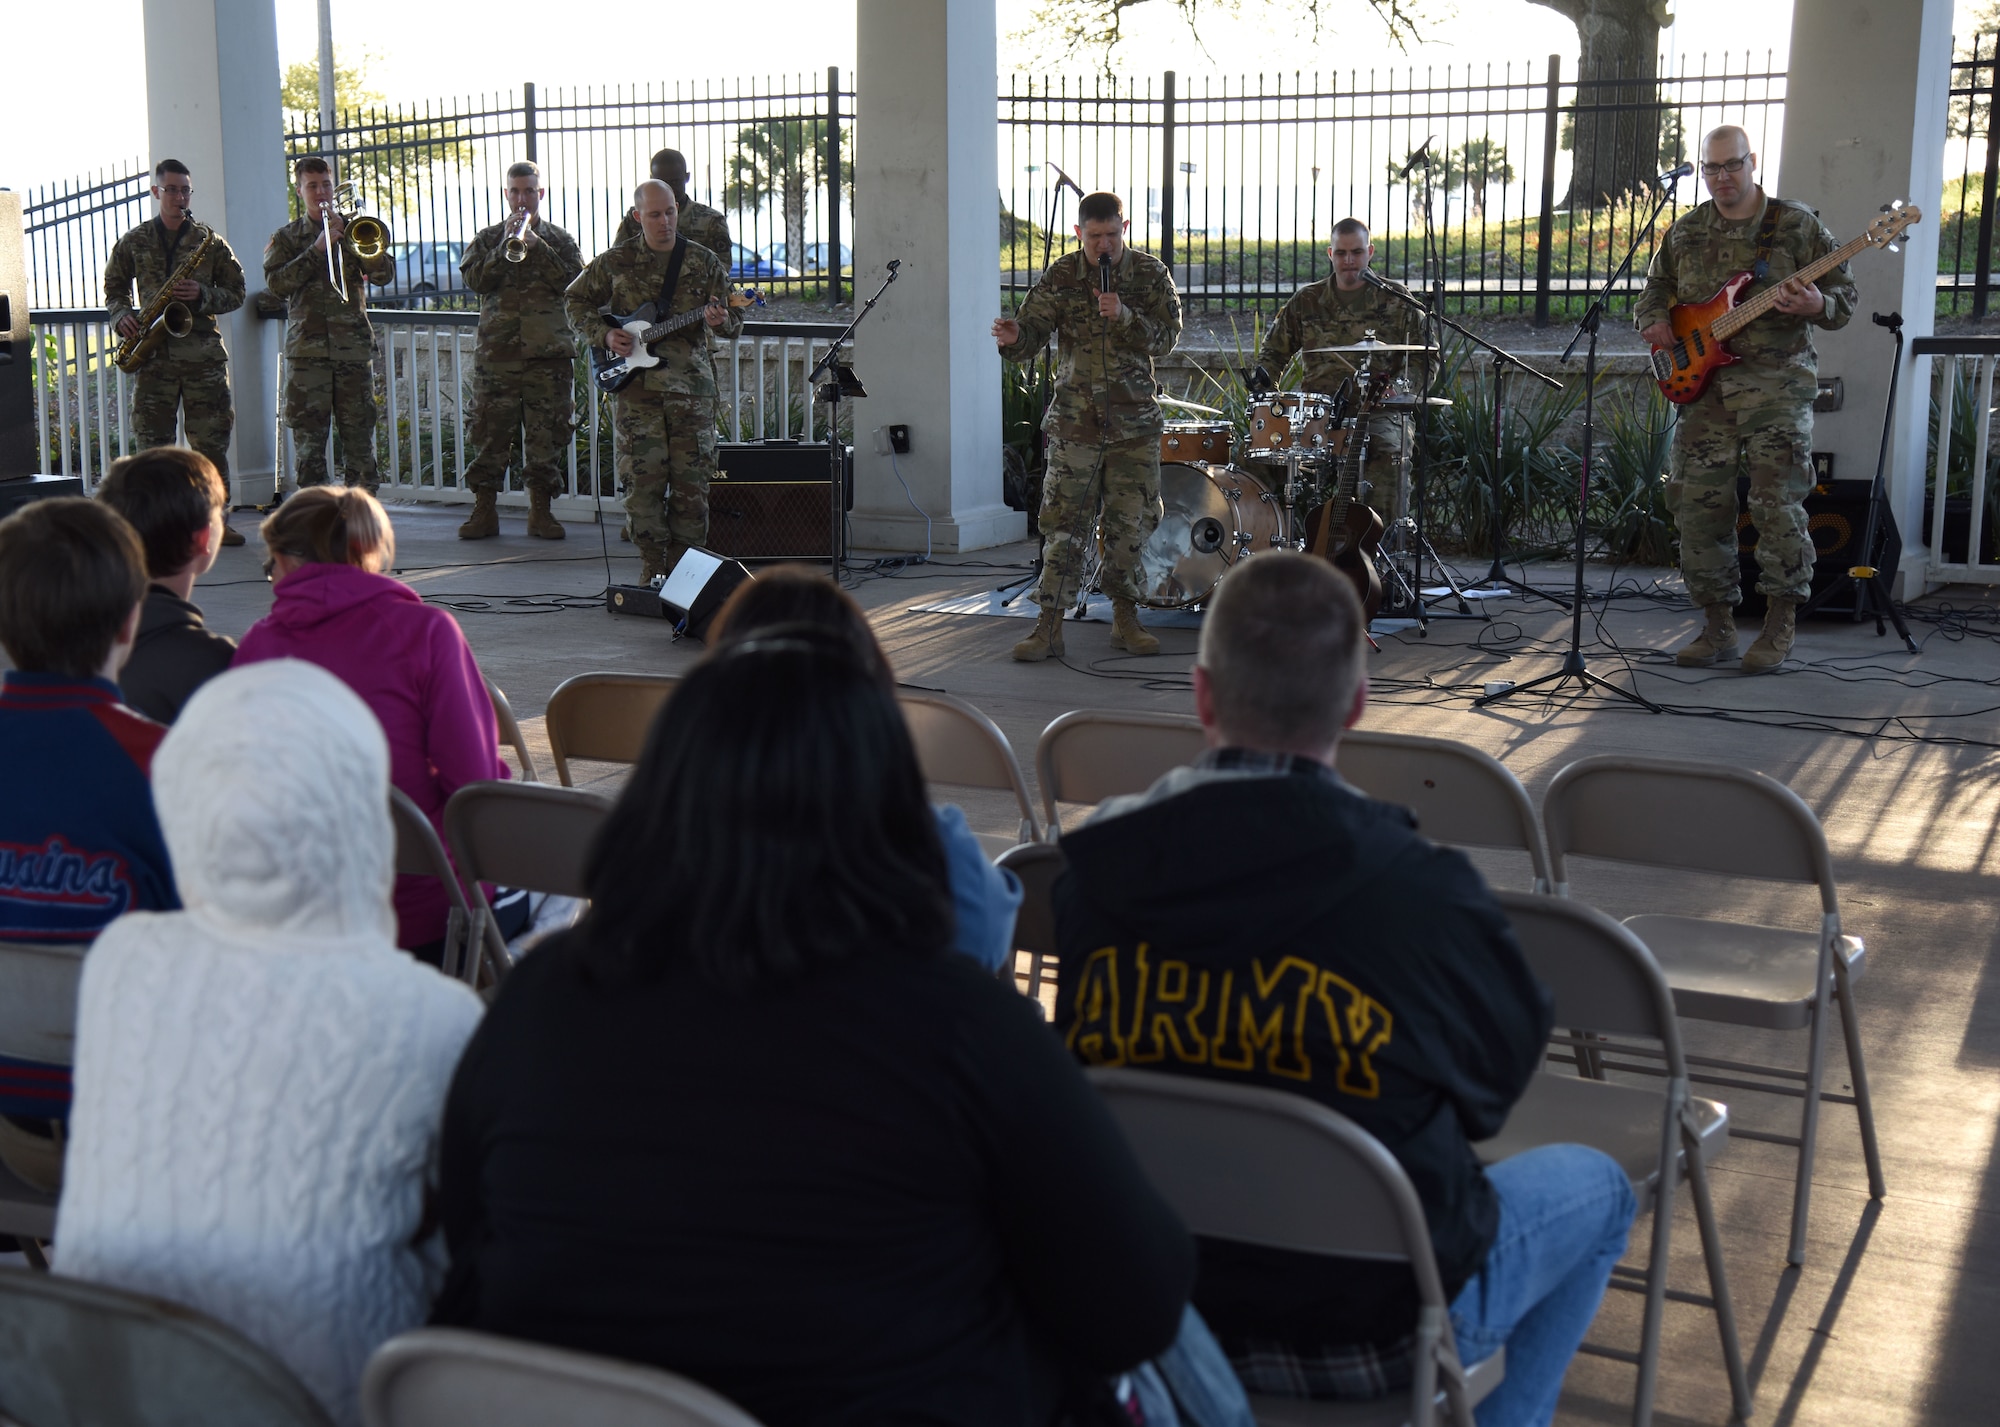 Members of the U.S. Army 41st Army Band perform at the Biloxi Lighthouse Park Pavilion March 13, 2018, in Biloxi, Mississippi. The band has been providing musical support and entertainment for over 50 years. They also performed at the White House Hotel, in Biloxi, Mississippi, and at the Vandenberg Commons on Keesler Air Force Base, Mississippi. (U.S. Air Force photo by Kemberly Groue)